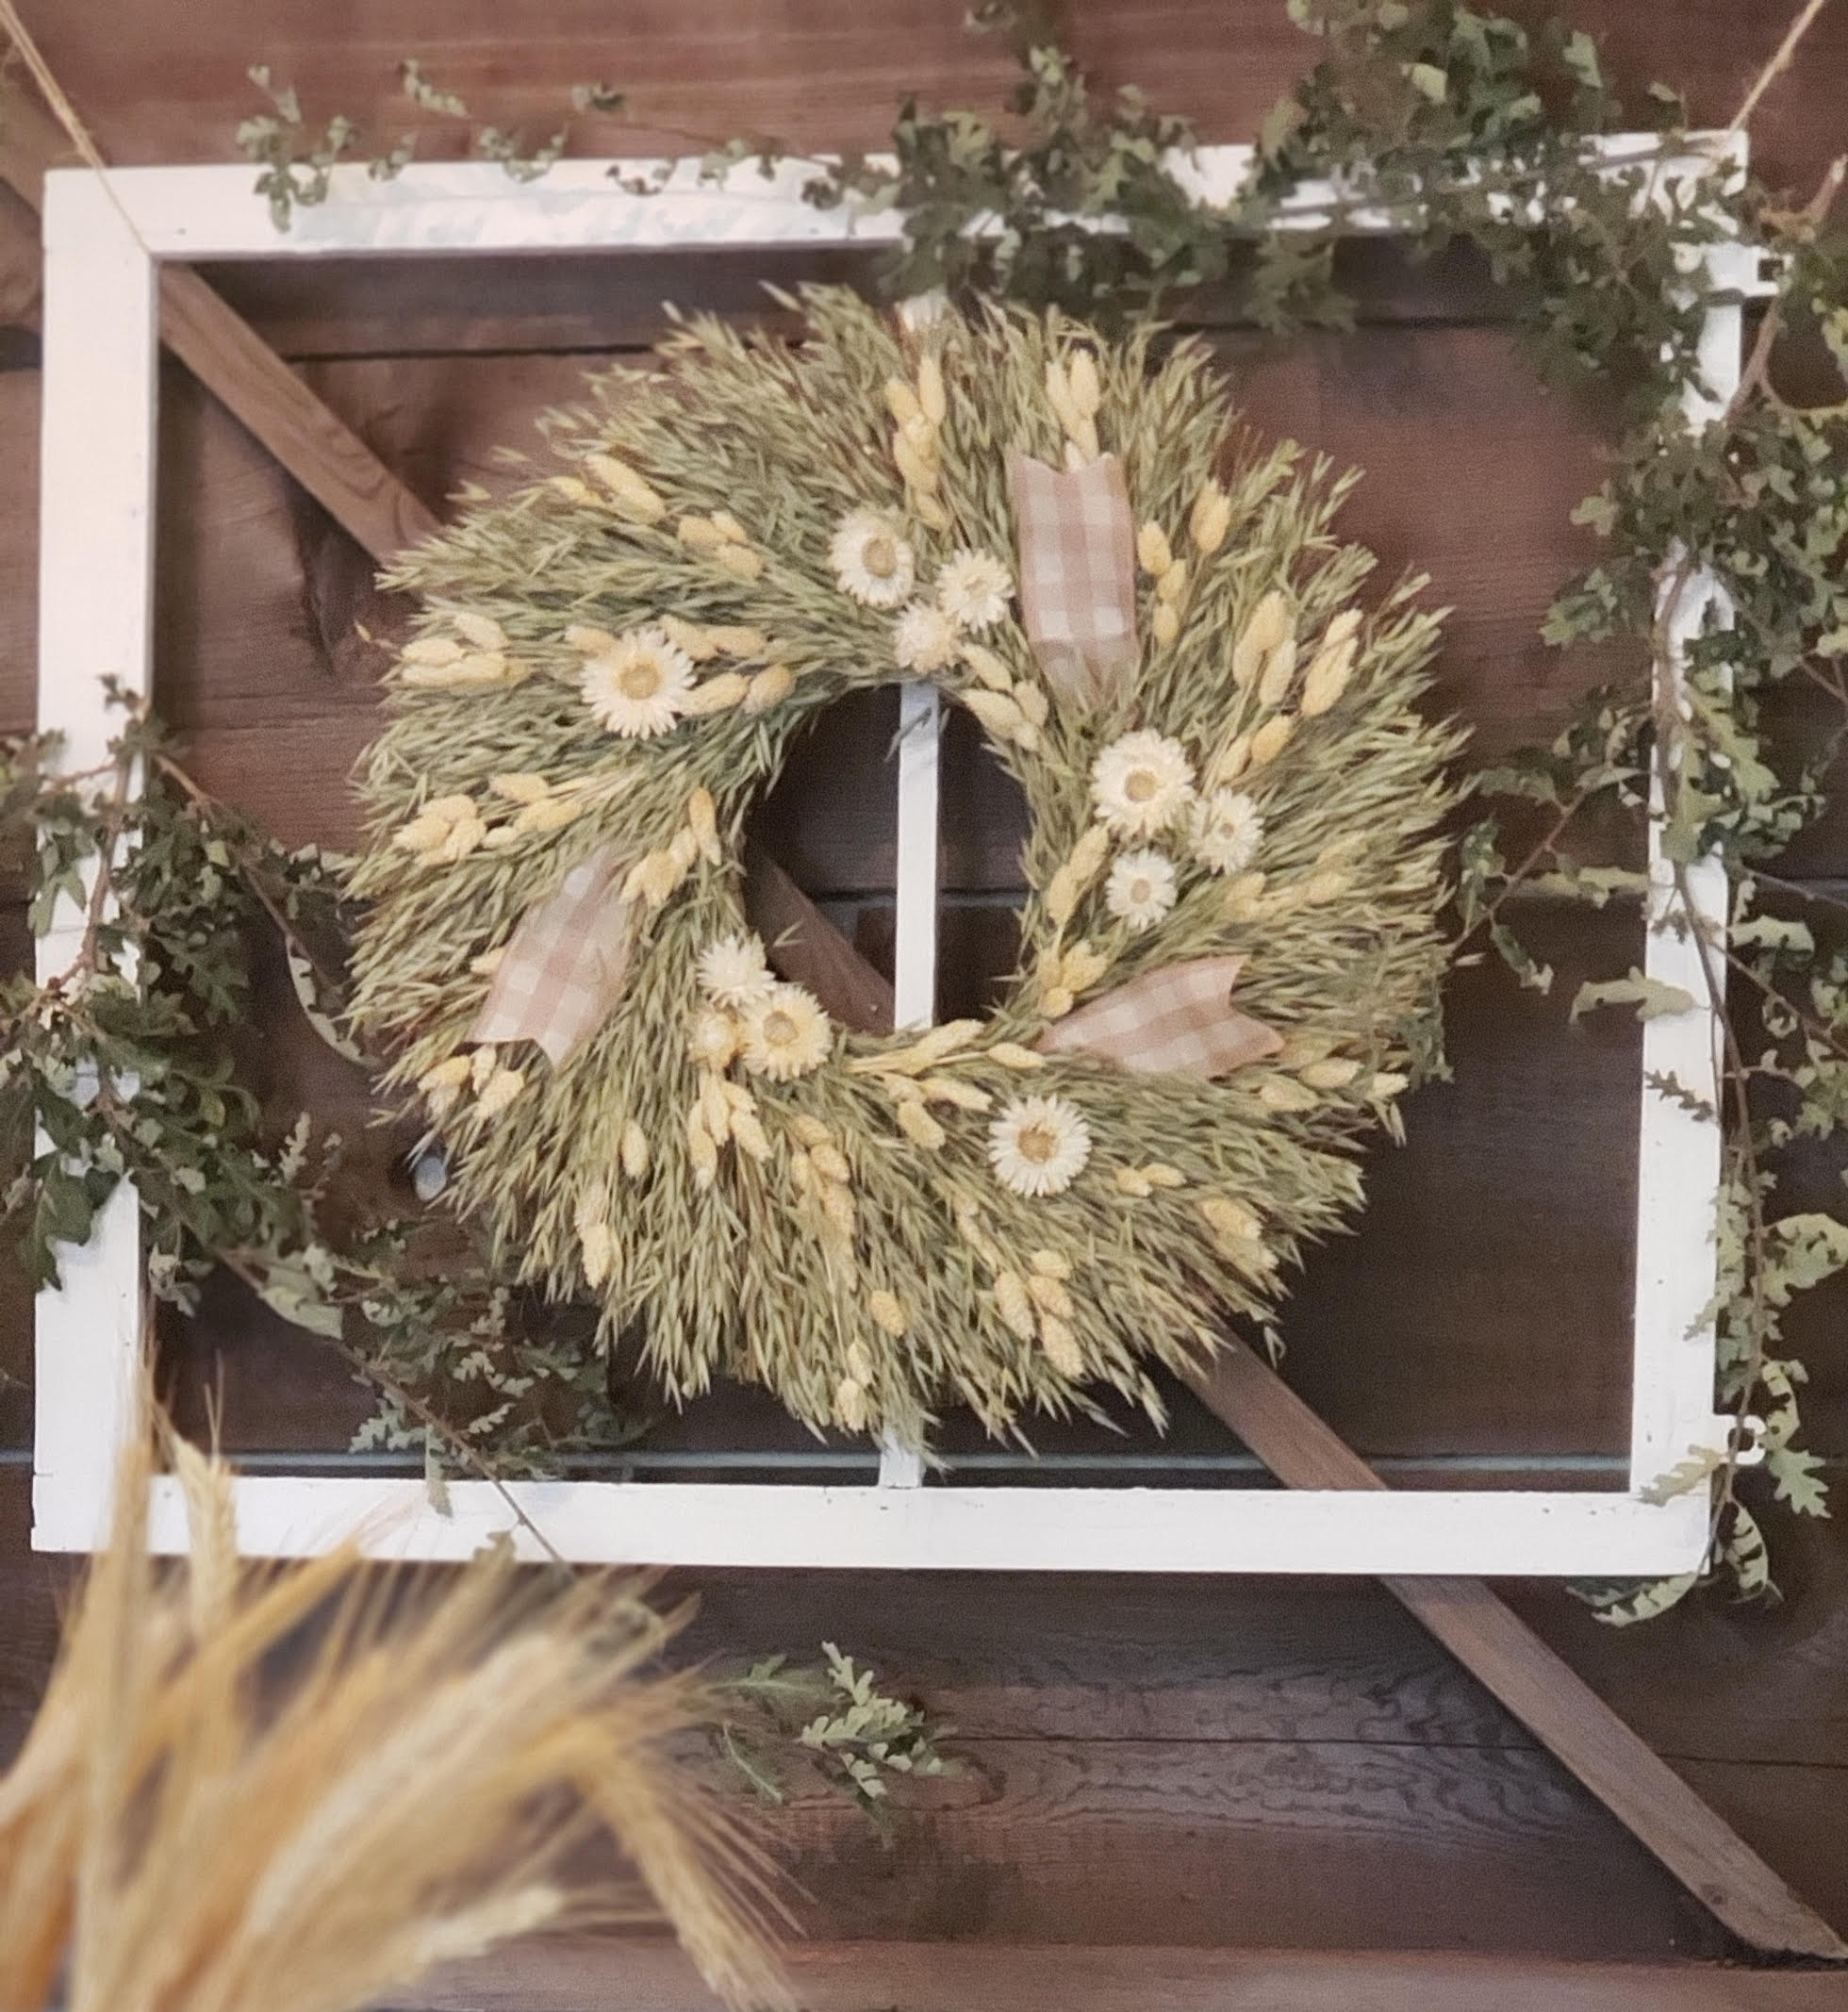 Sun kissed wreath above the table